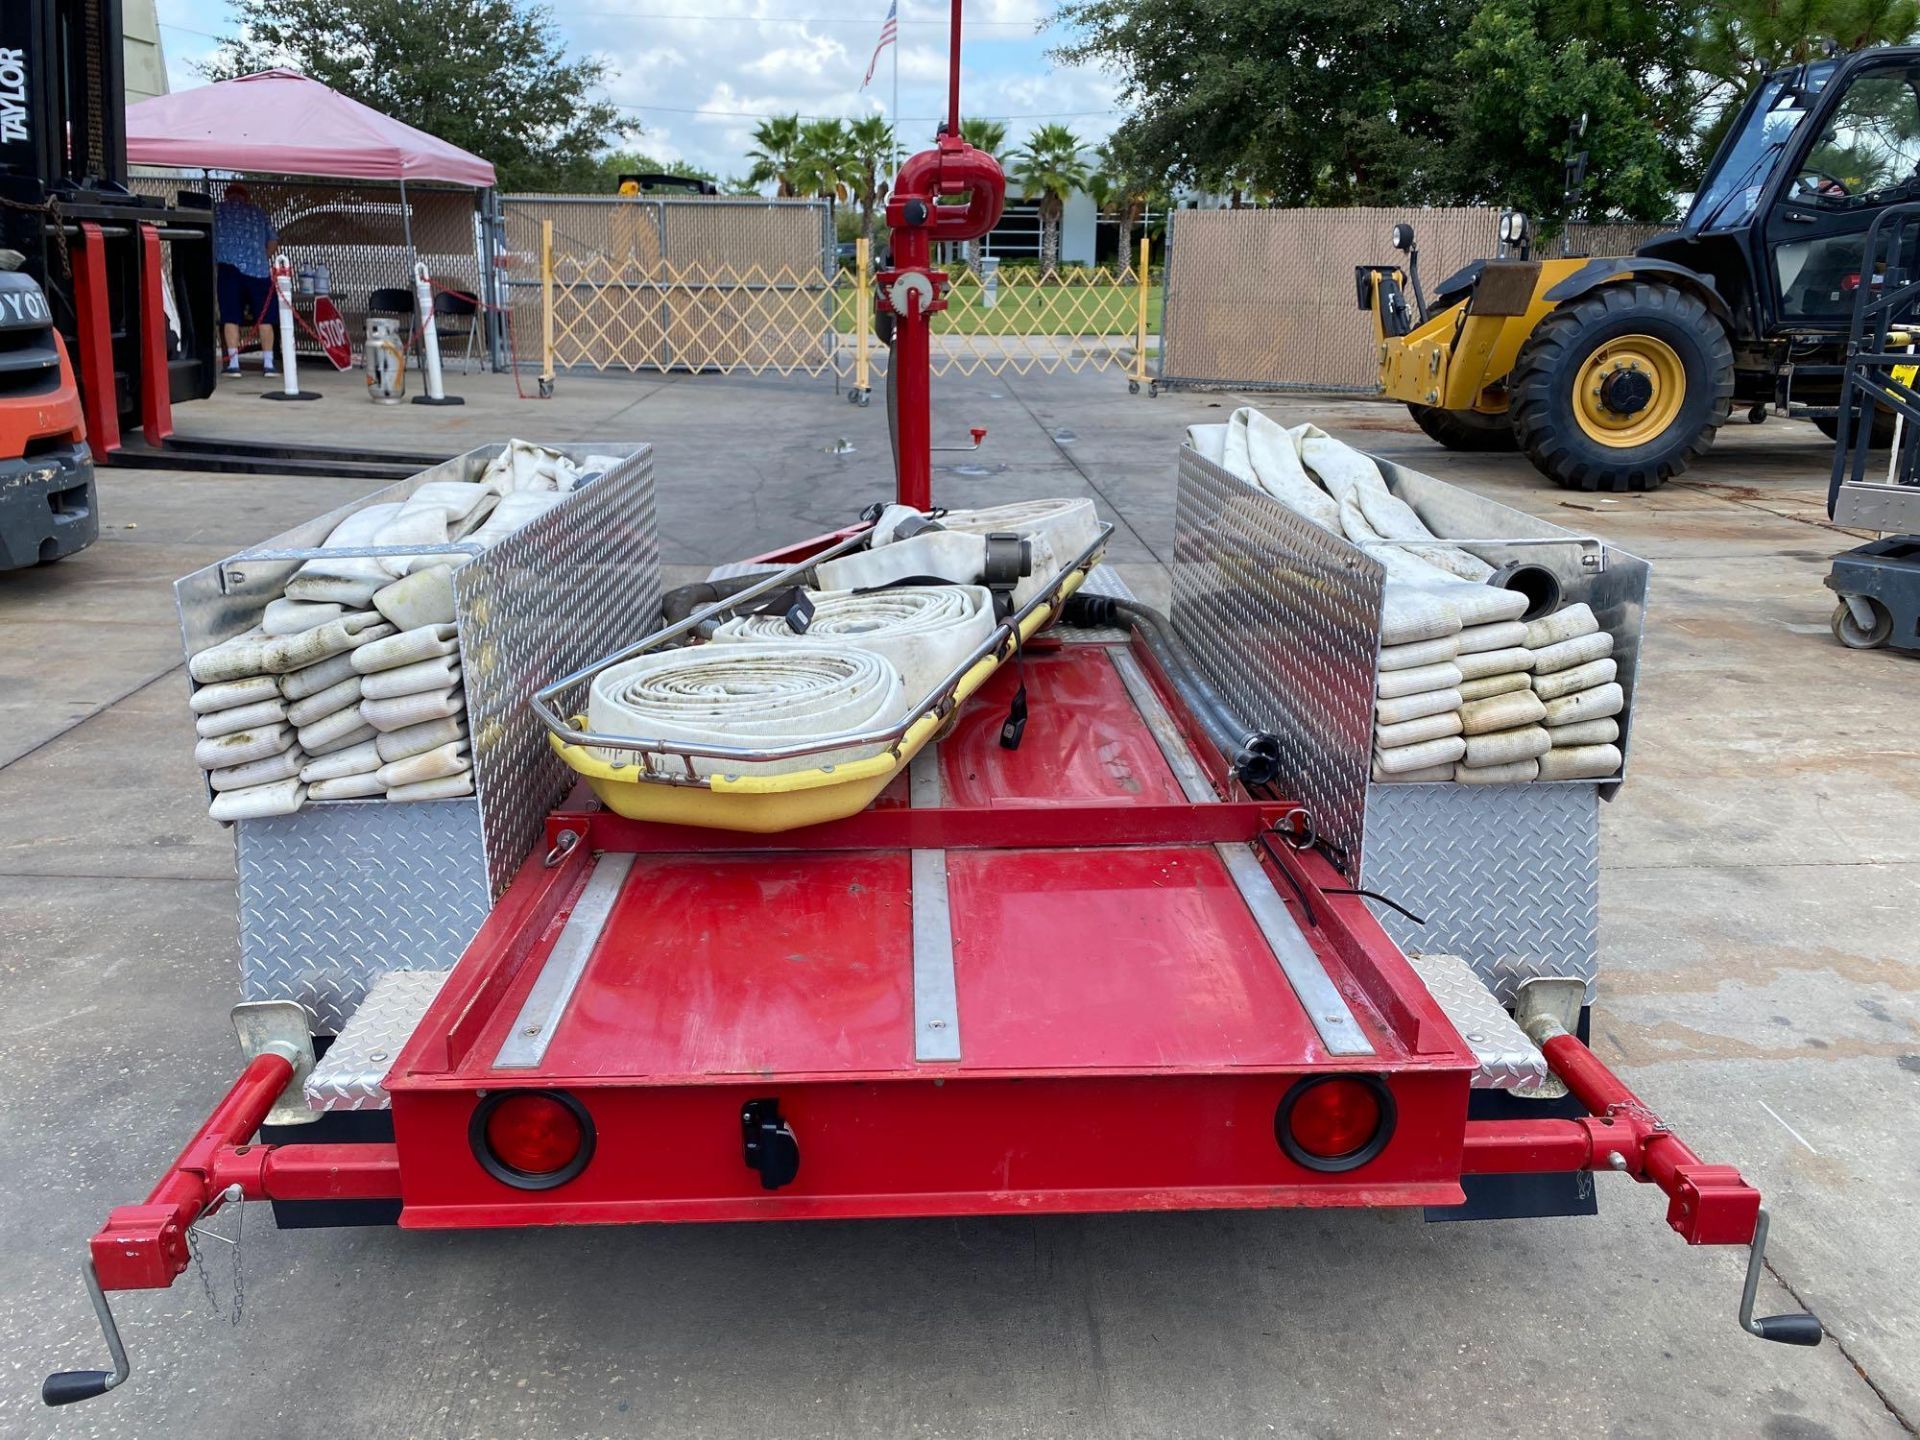 MGS INC. FIRE SUPPORT TRAILER WITH HOSES, STRETCHER, NATIONAL FOAM NOZZLE/ATTACHMENT - Image 12 of 28